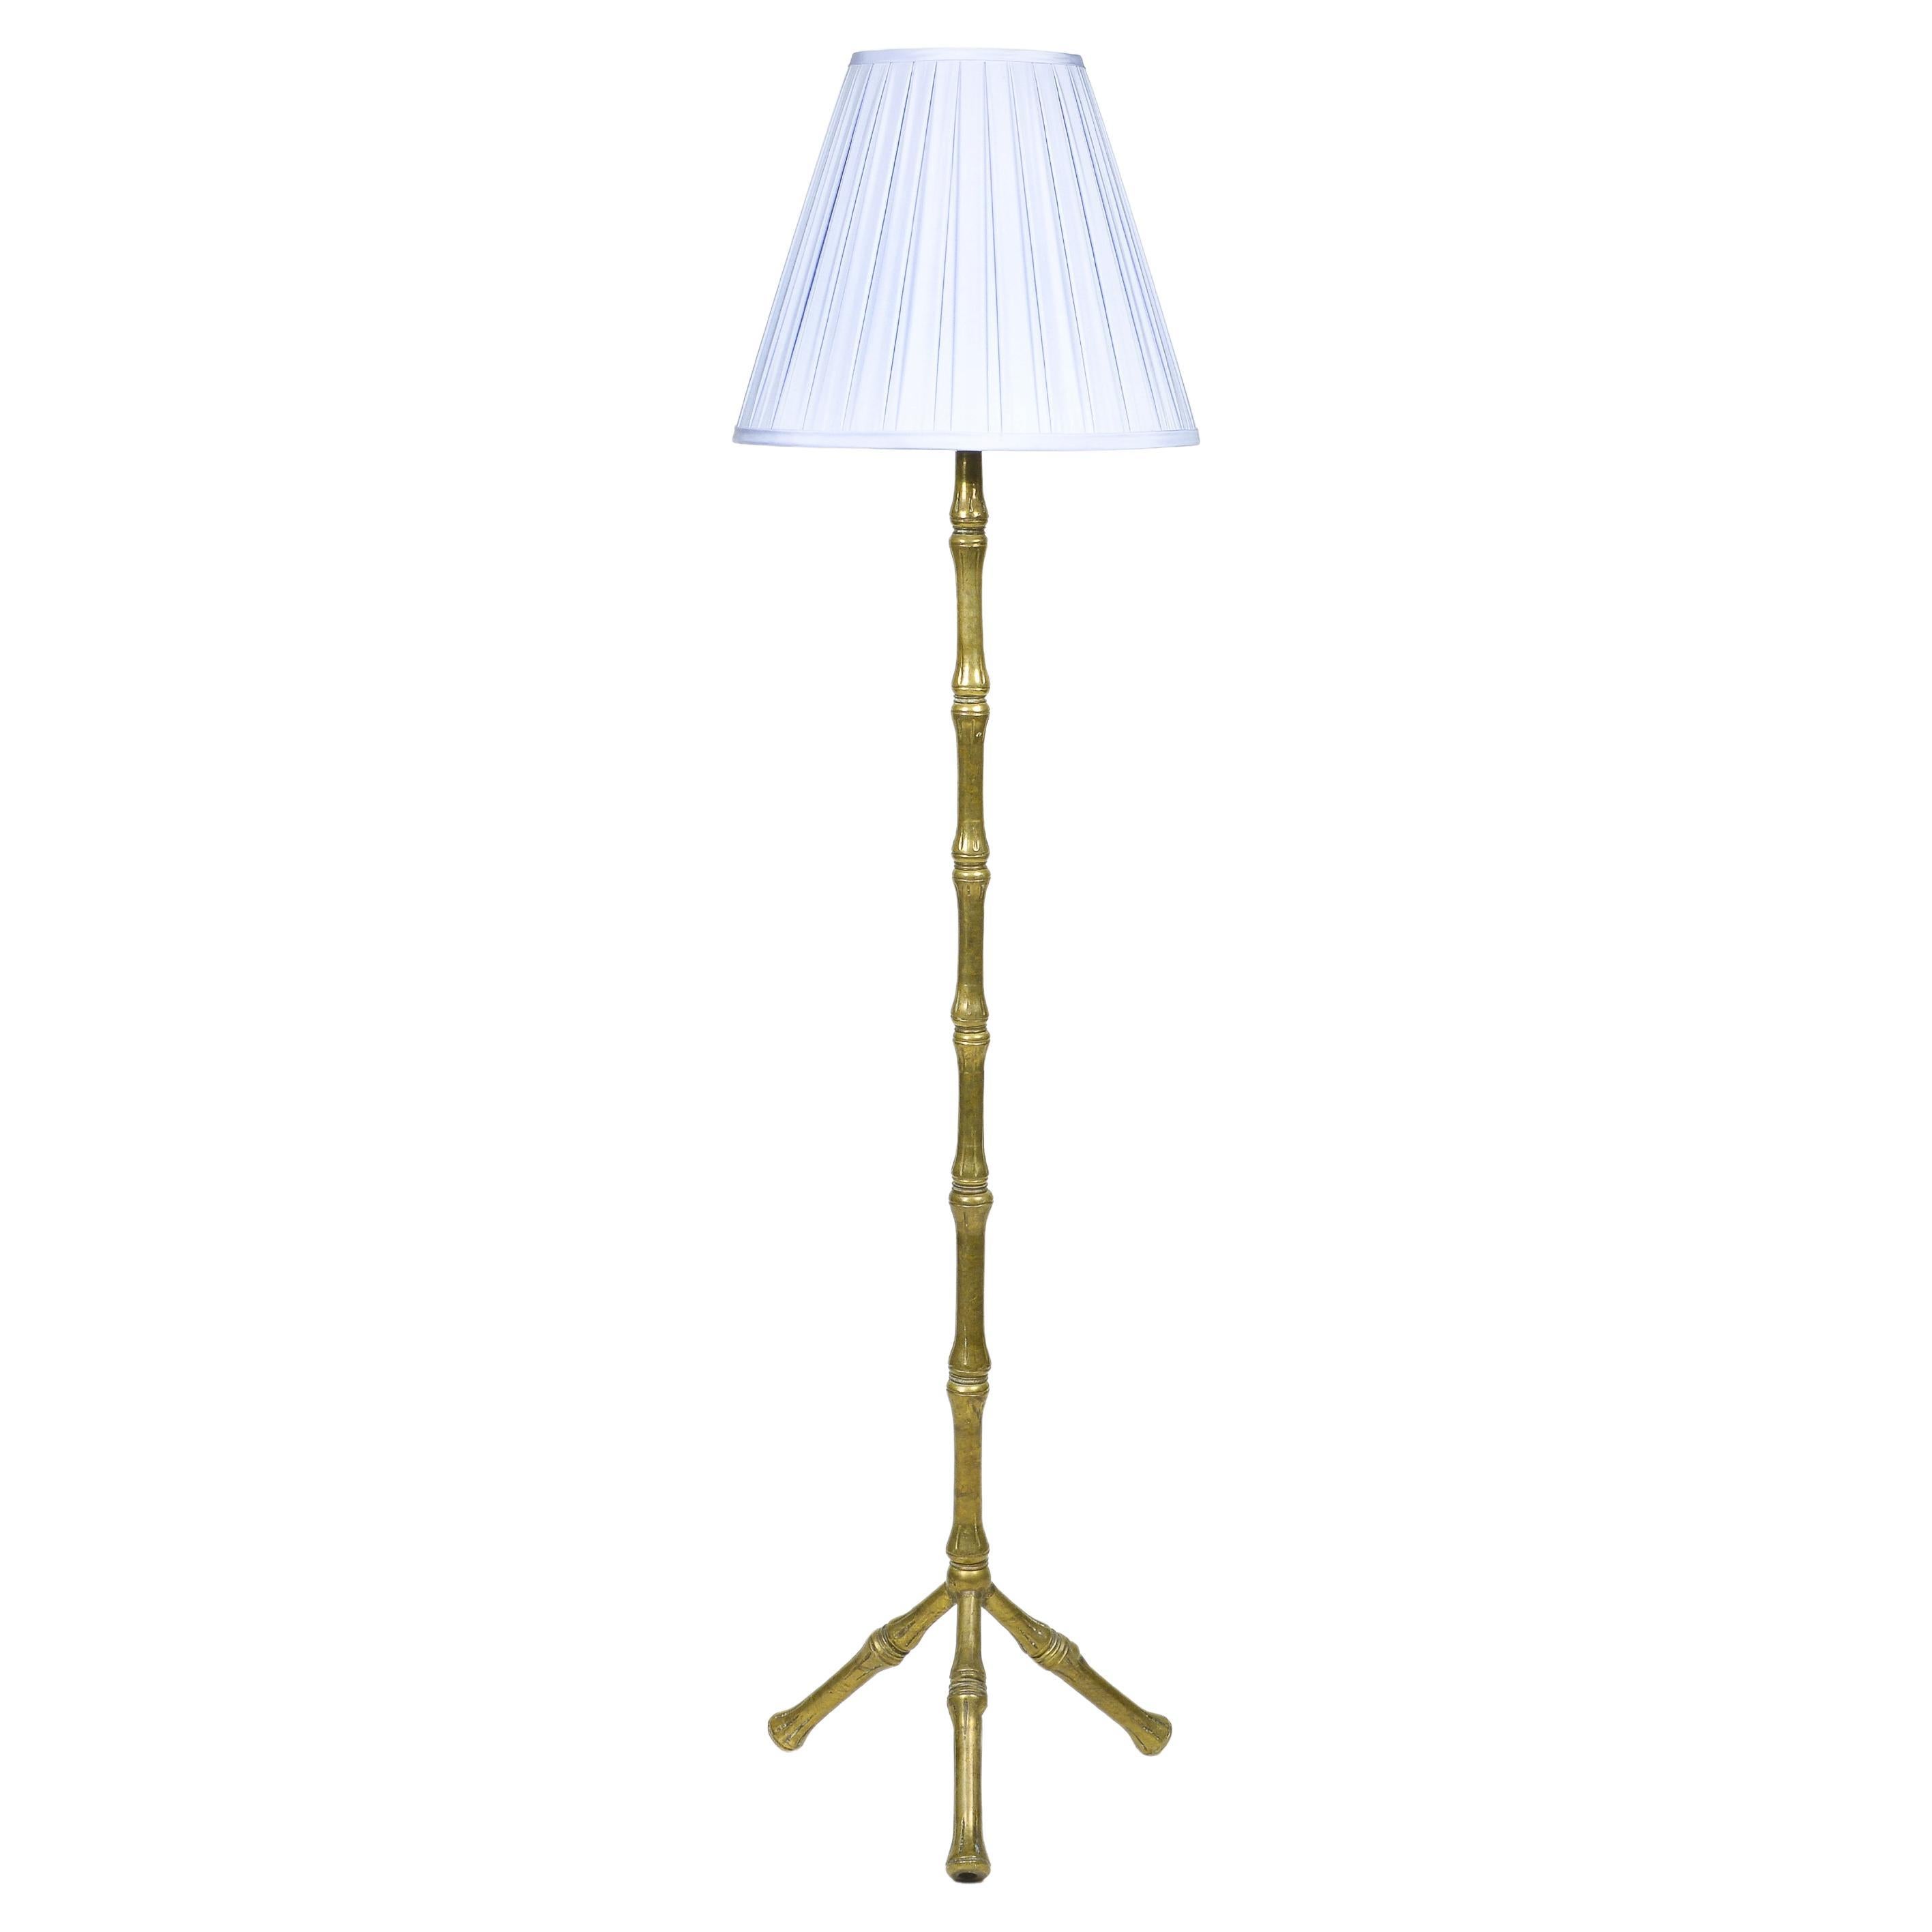 A Bronze Faux Bamboo Stehlampe im Angebot